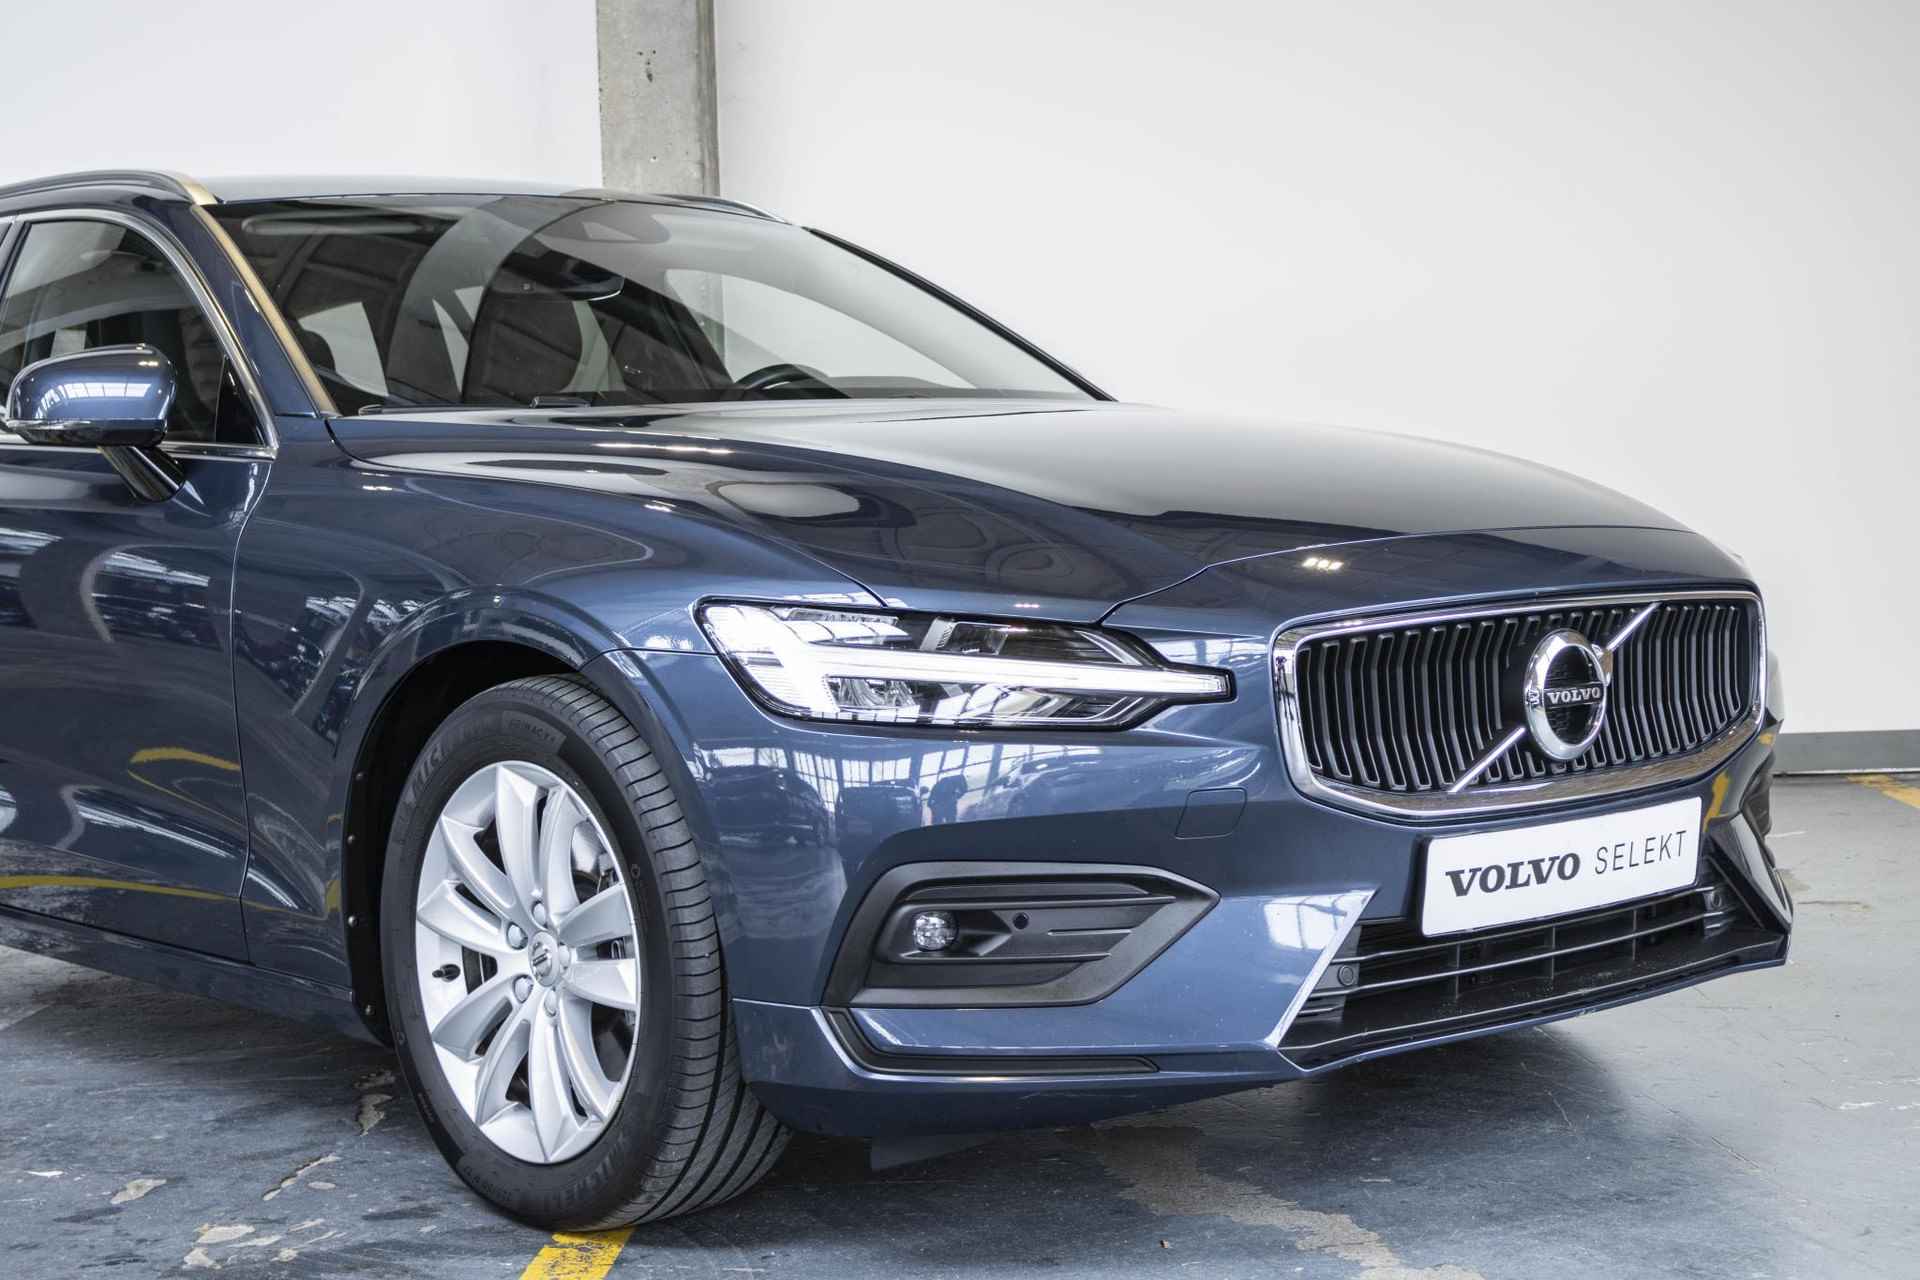 Volvo V60 B4 Automaat Business Pro | Blind Spot | Parkeercamera | Park Assist voor en achter | Adaptive cruise control | Extra getint glas | Keyless entree - 10/40